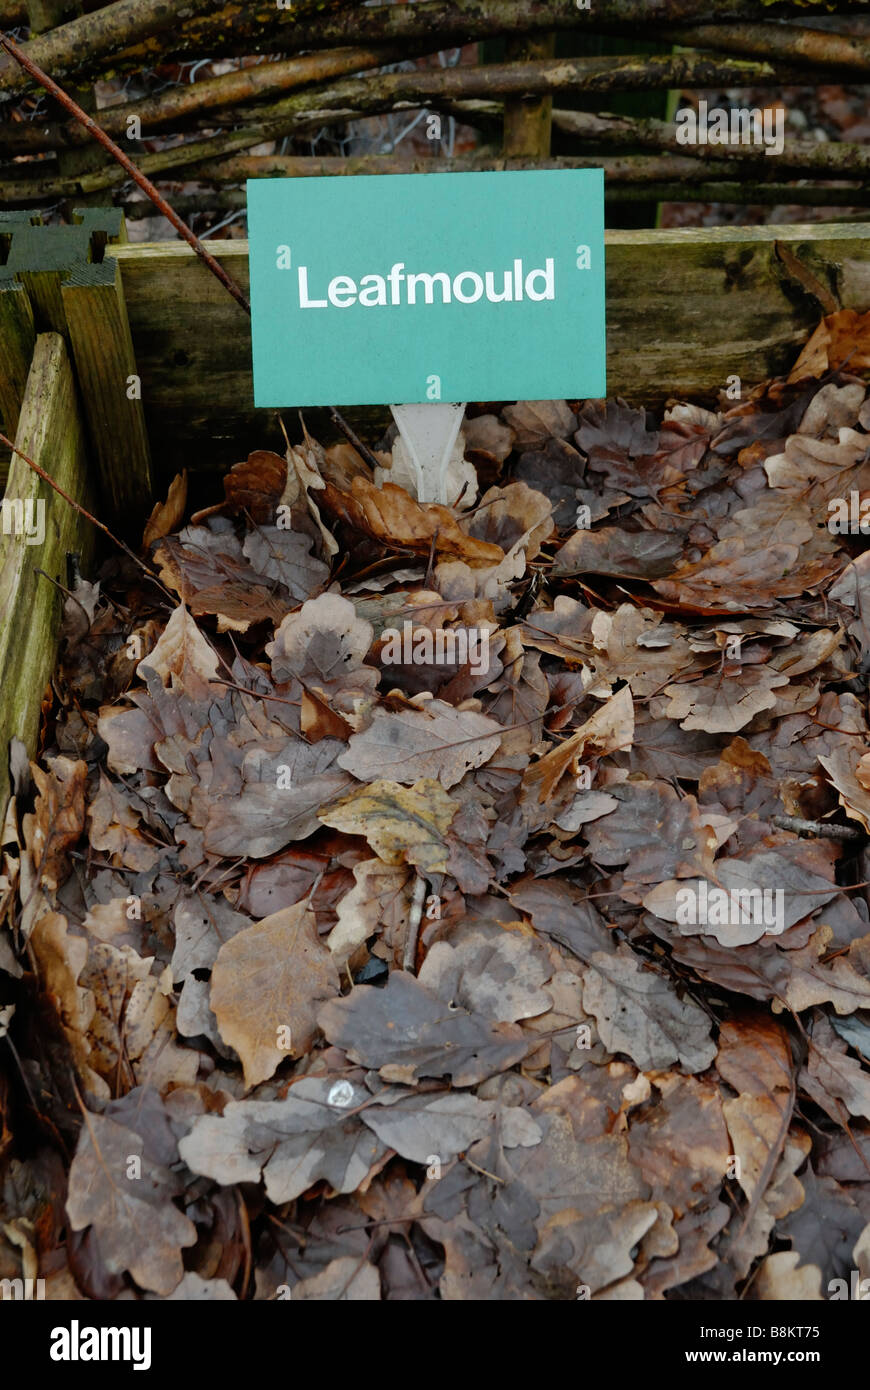 Leafmould in a compost bin Stock Photo